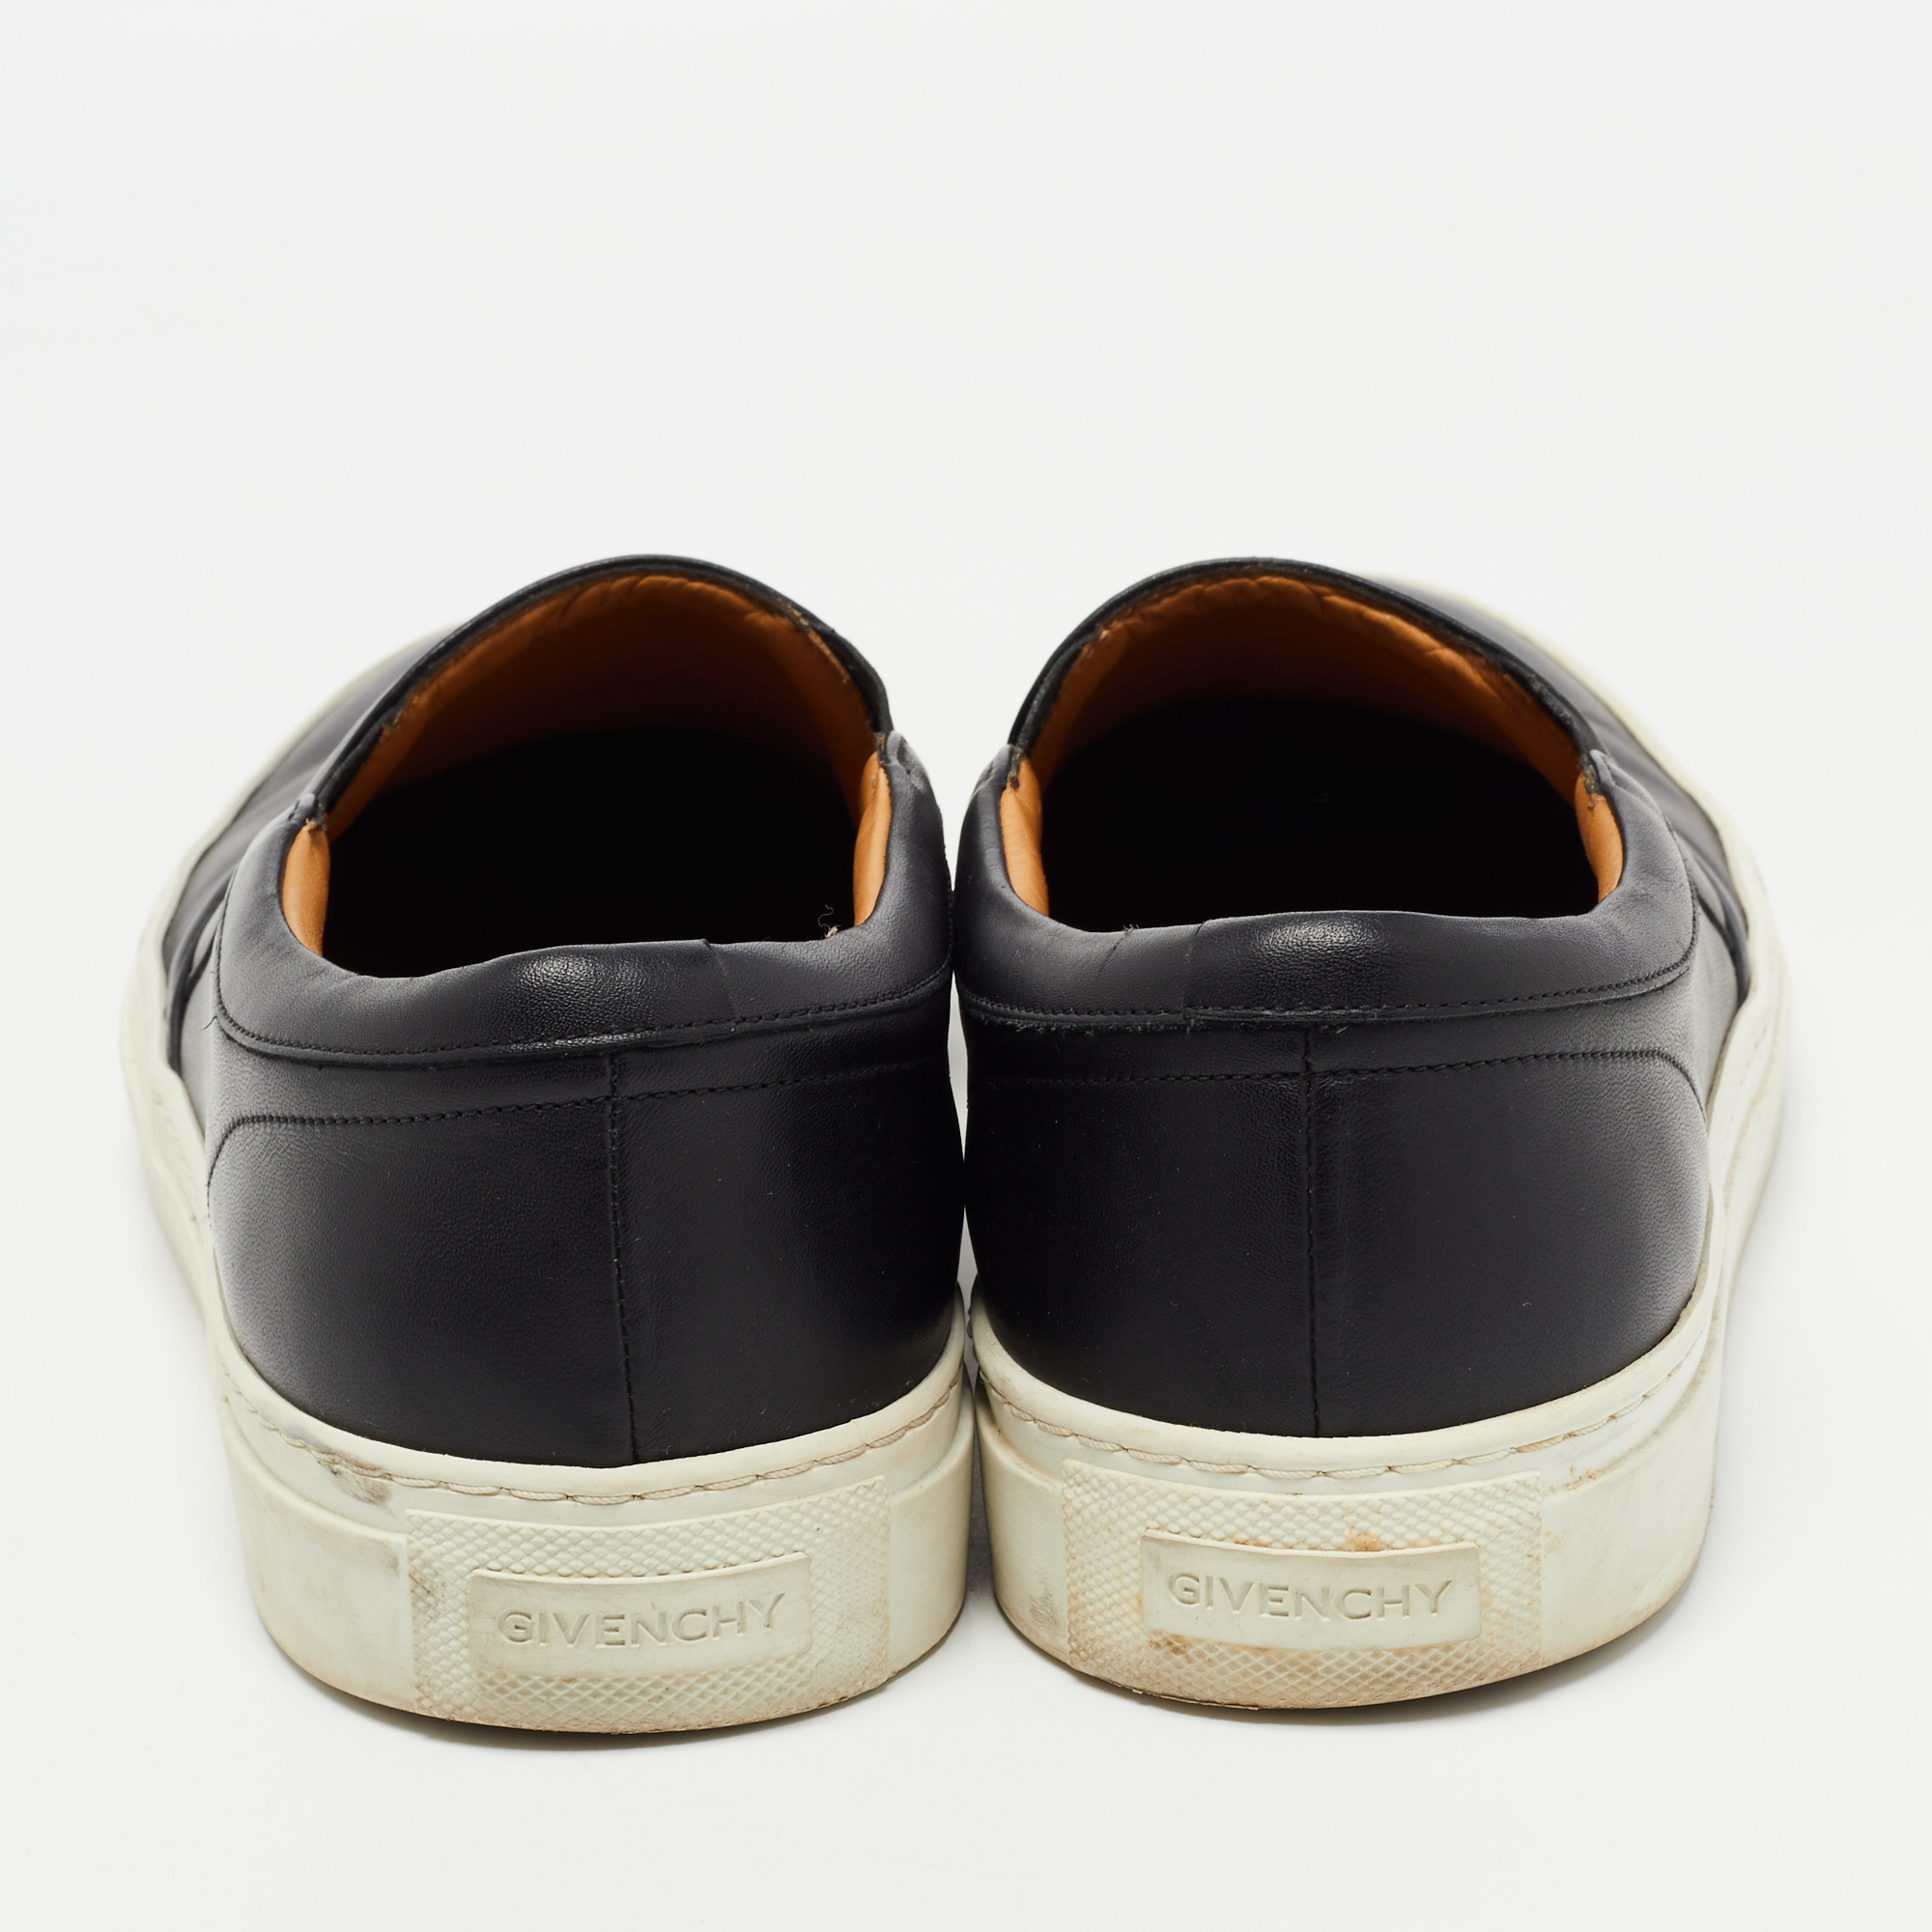 Givenchy Black Leather Slip On Sneakers Size 44